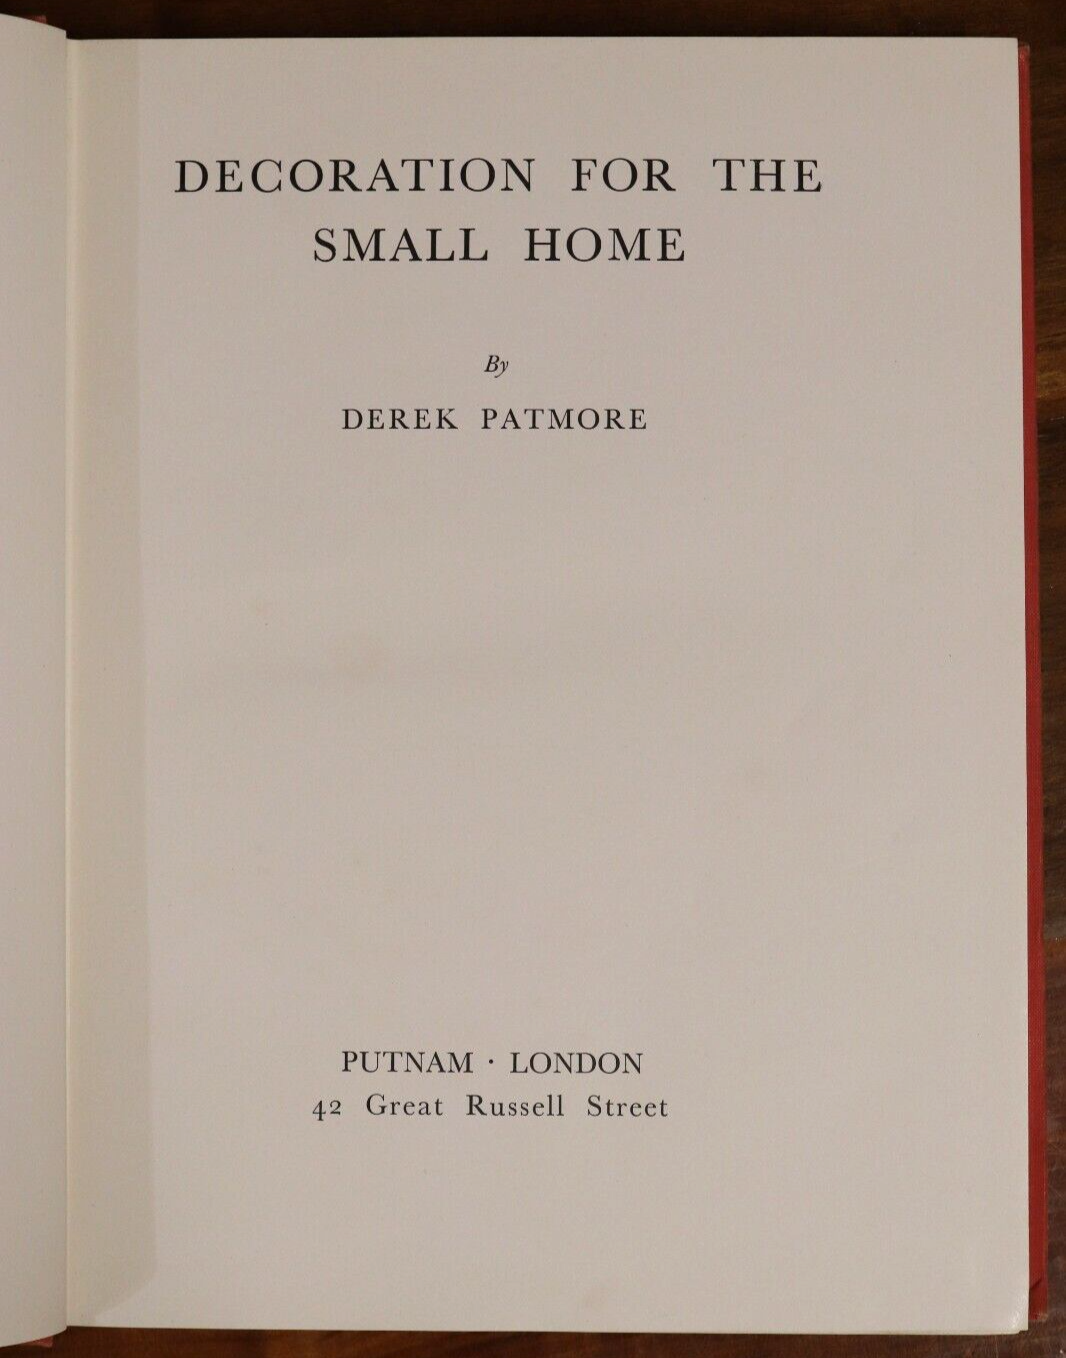 1938 Decoration For The Small Home 1st Edition Antique Architecture Book - 0